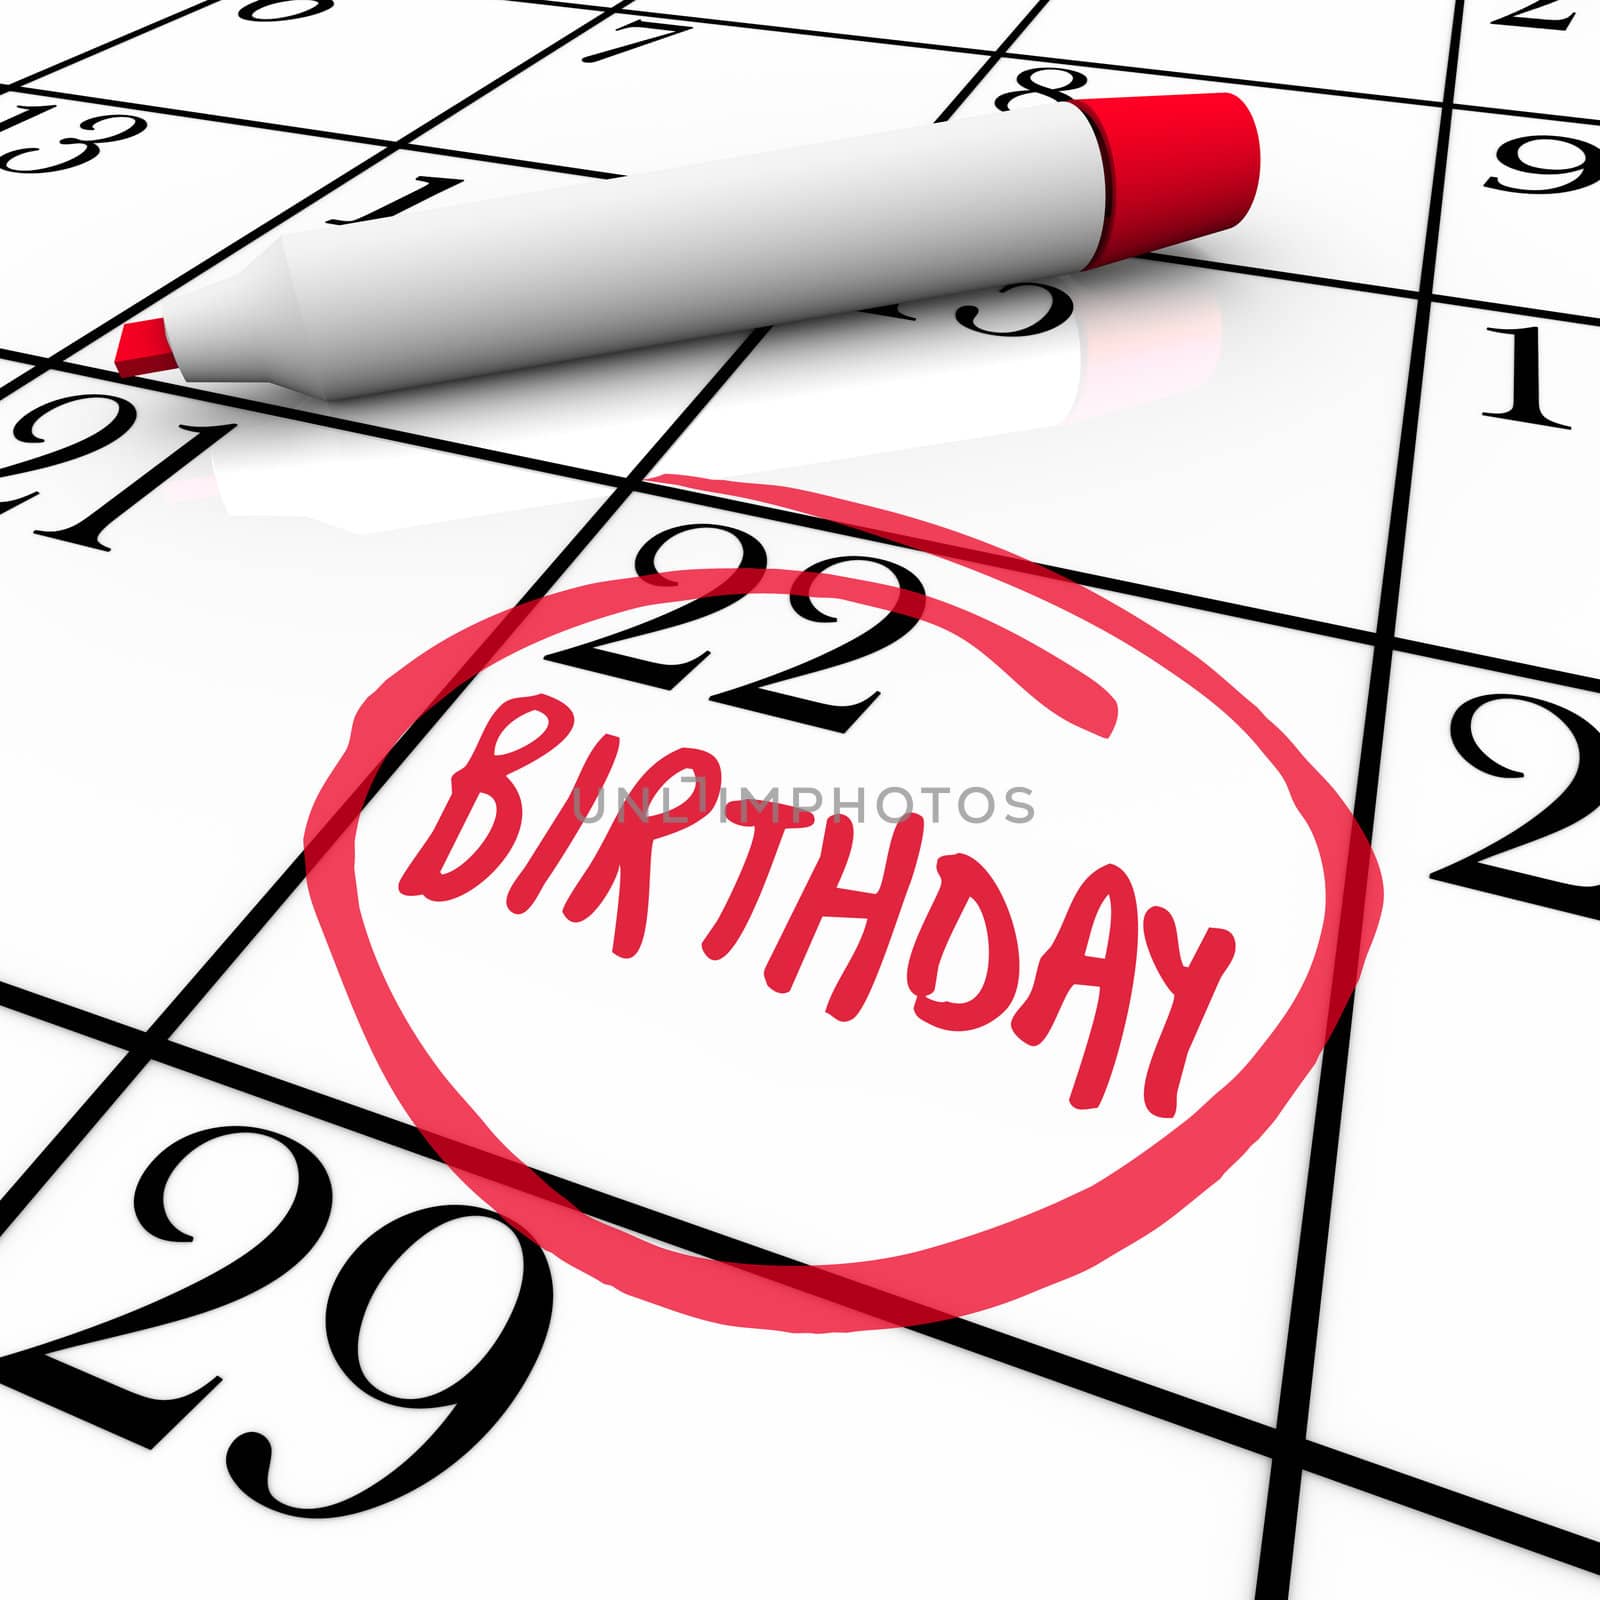 A day with the word Birthday circled on a calendar as a reminder of a party or celebration in honor of you, a friend, family member or co-worker